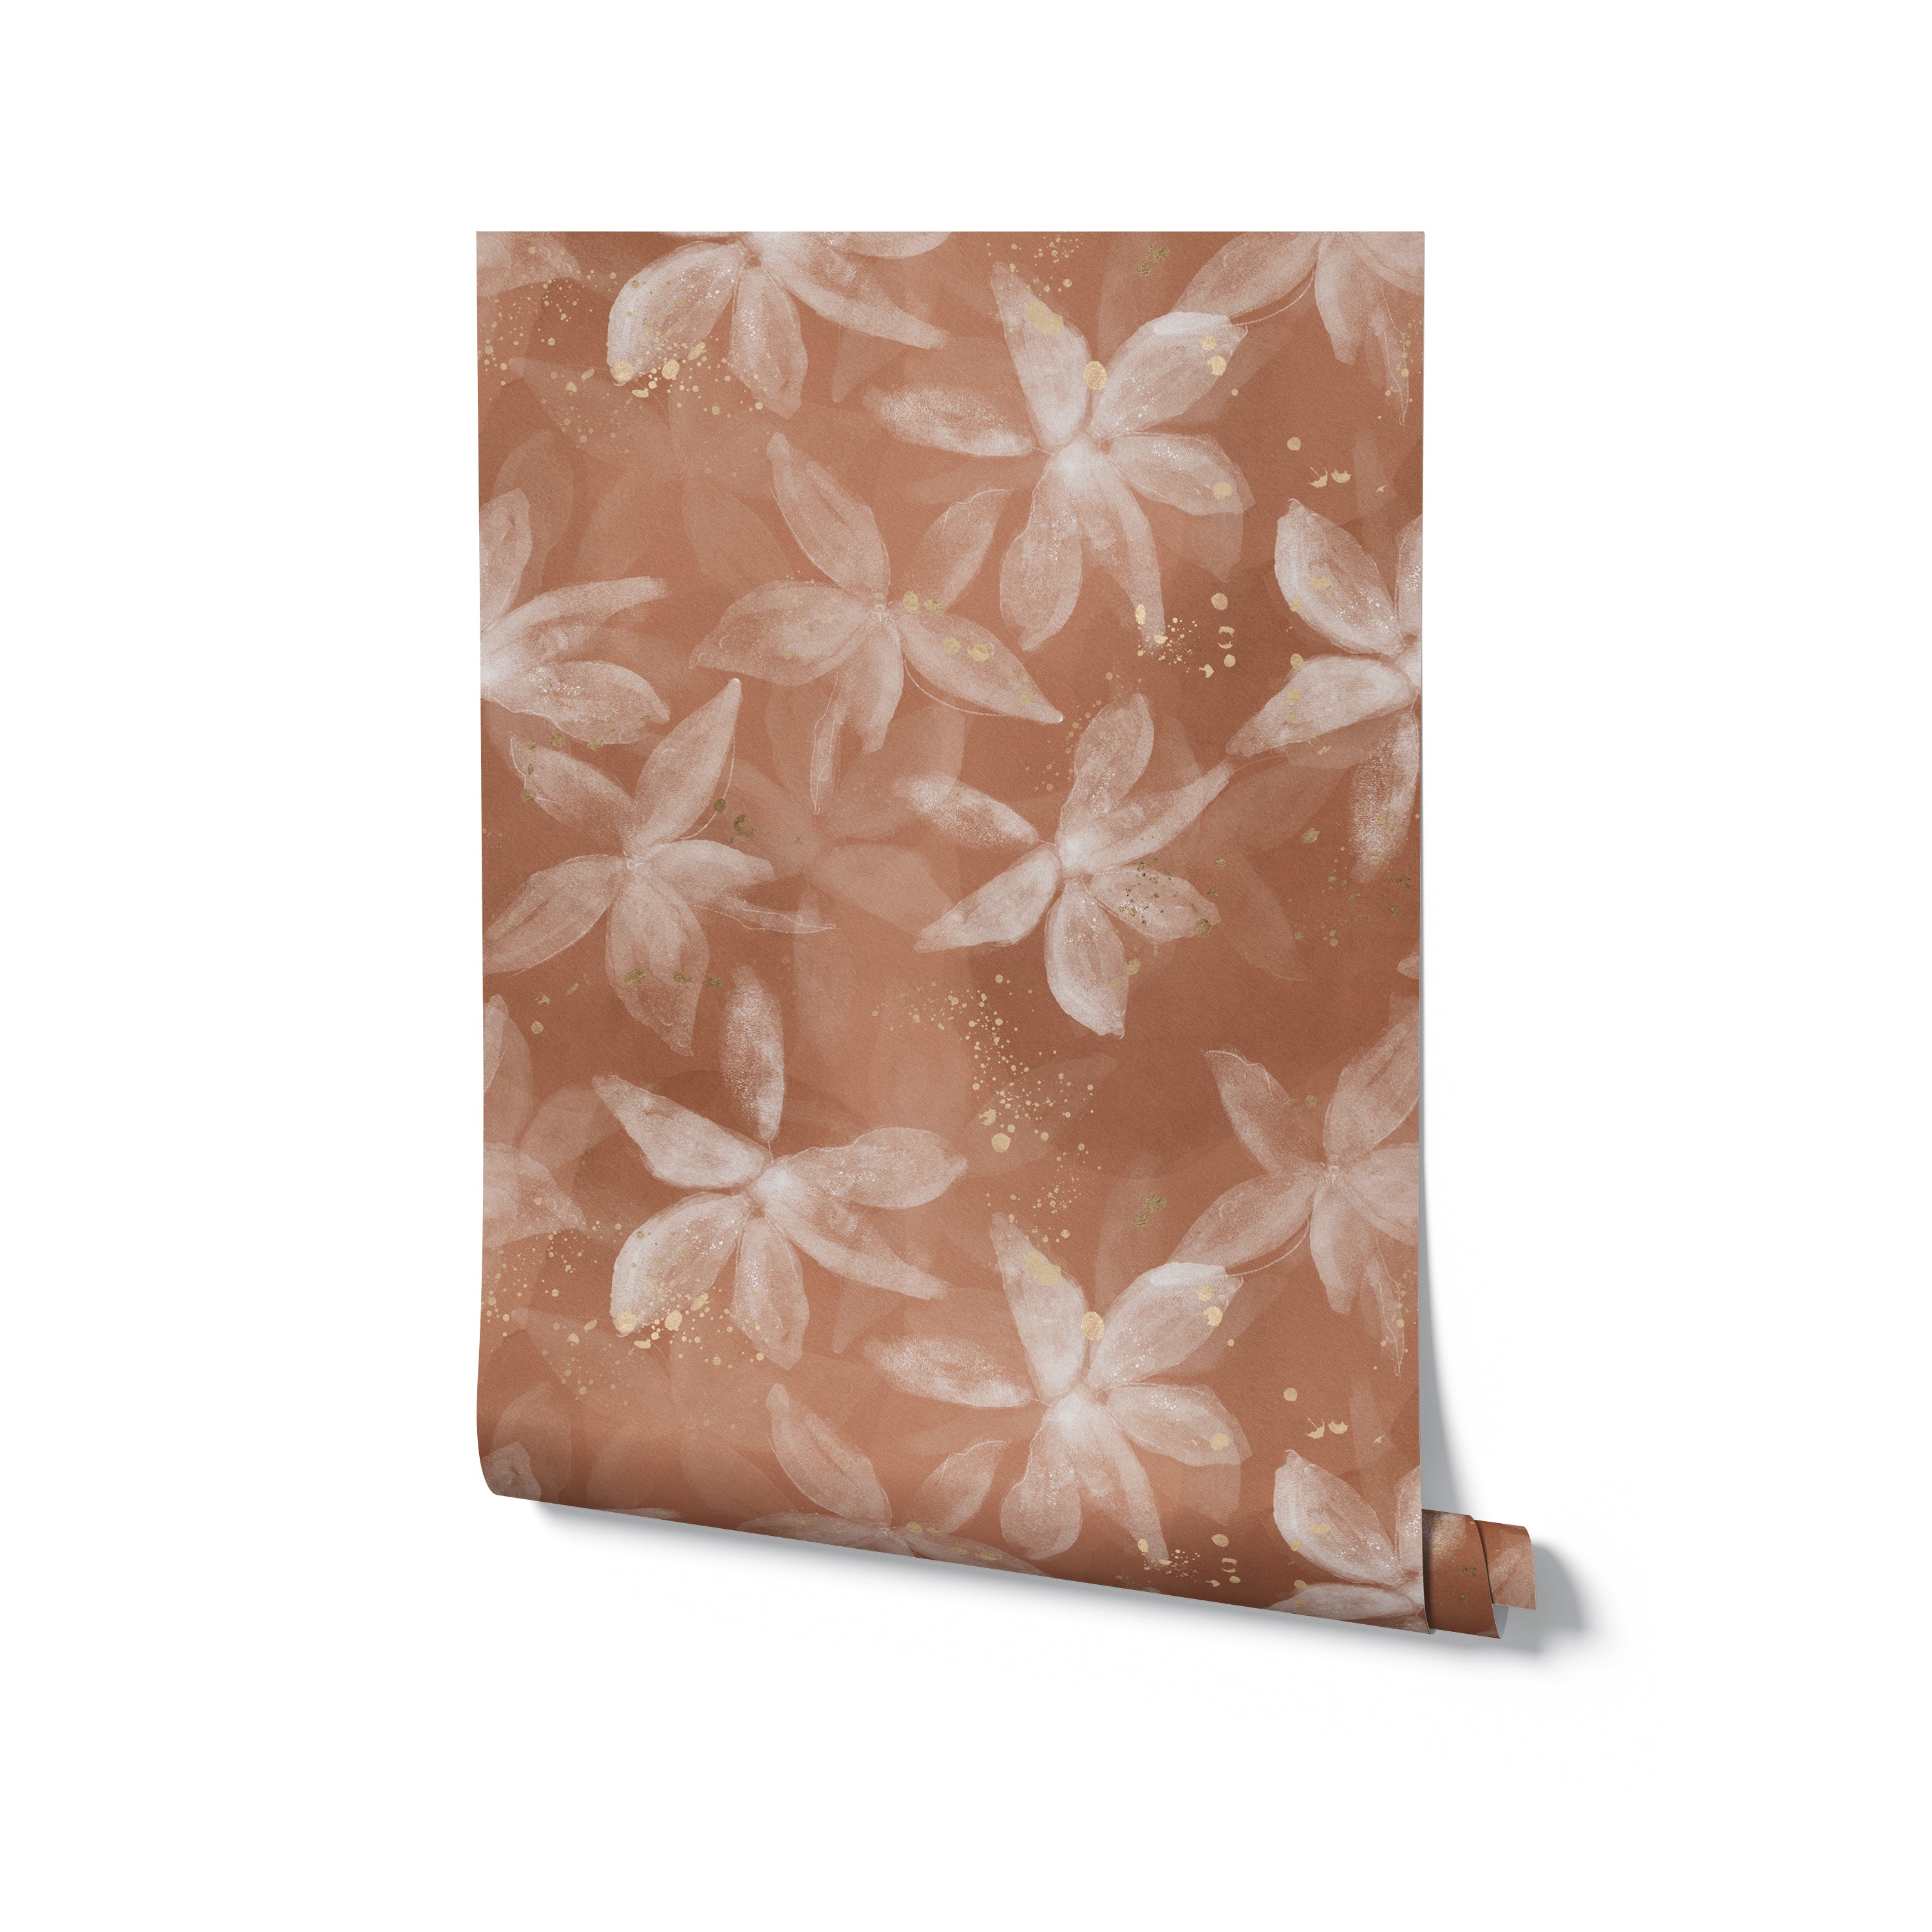 A roll of Shimmer and Terracotta Wallpaper, presented standing upright. The wallpaper displays a repeating pattern of translucent white flowers on a terracotta background, with hints of gold flecks throughout, providing a subtle shimmering effect.